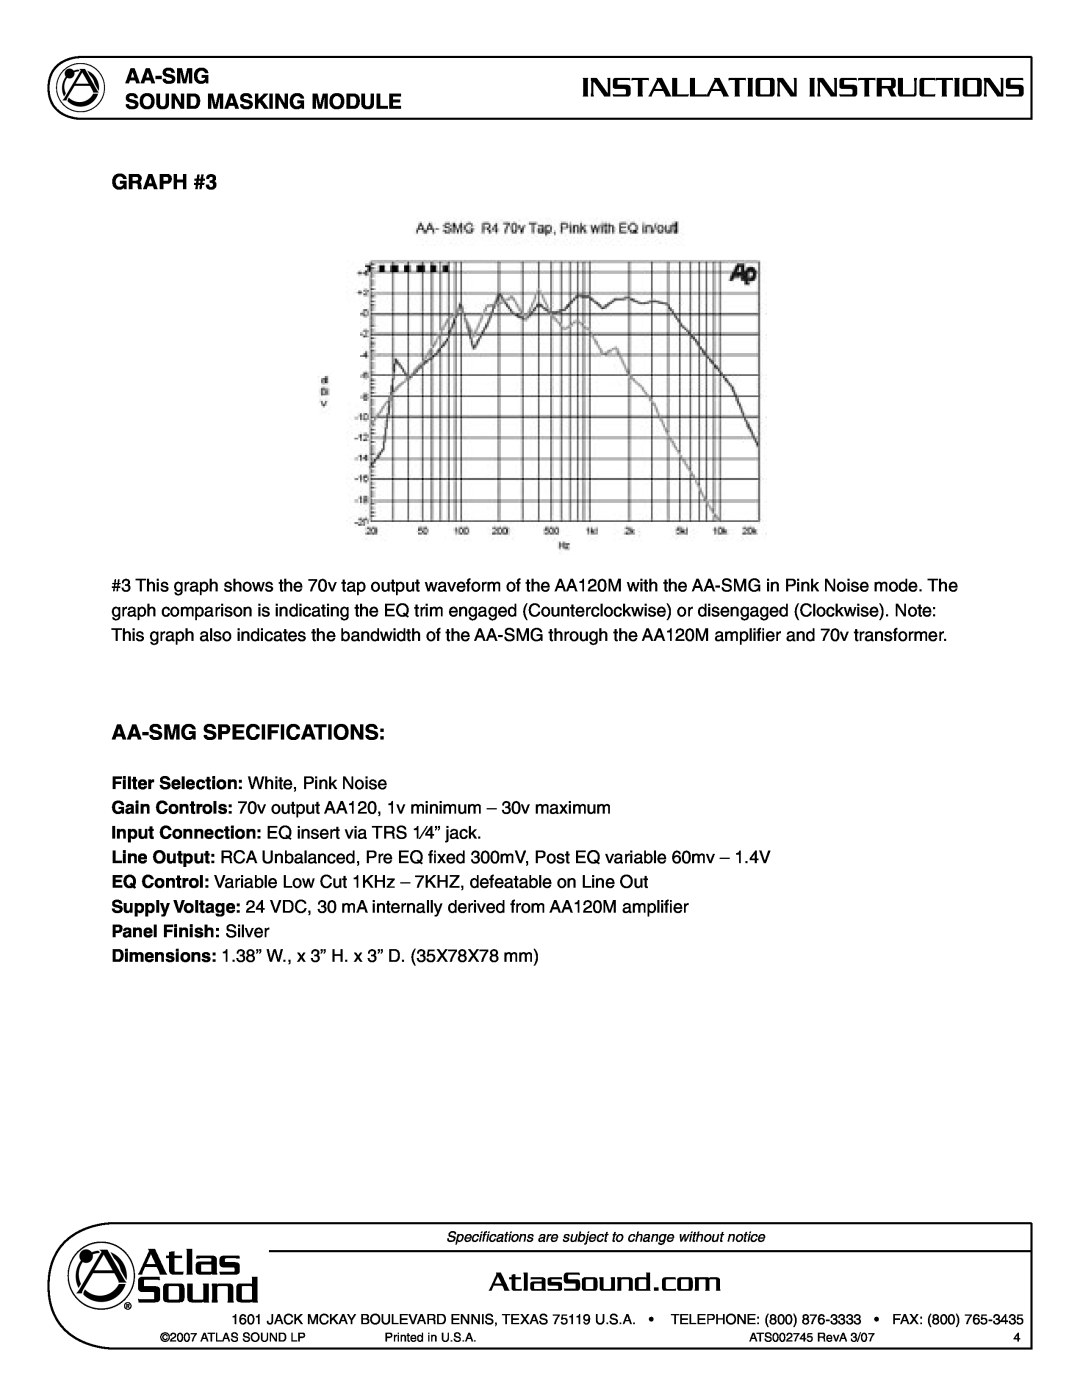 Atlas Sound AA-SMG SOUND MASKING MODULE GRAPH #3, Aa-Smgspecifications, Installation Instructions, Panel Finish Silver 